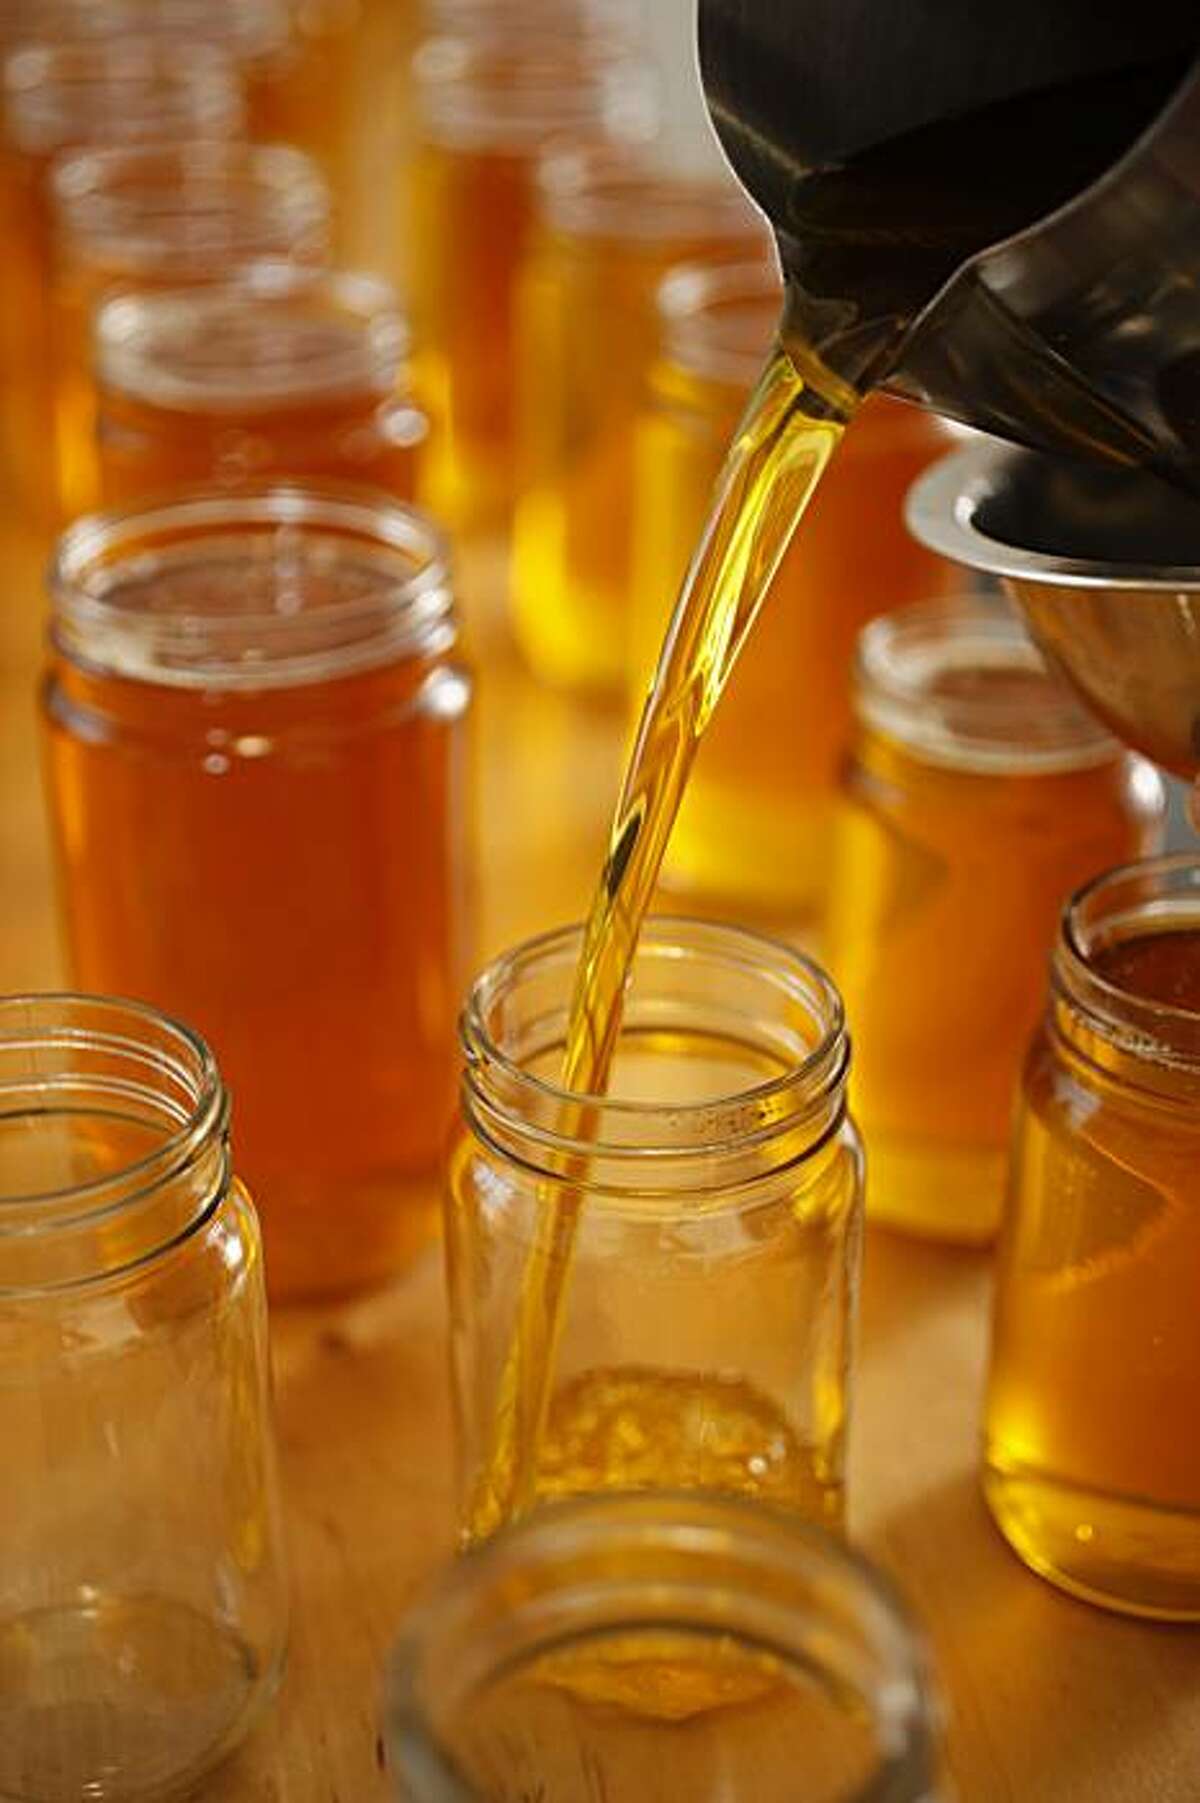 Ancient Organics, which produces homemade ghee in Richmond, Calif., on December 31, 2009. Freshly cooked ghee being poured into glass jars for distribution.